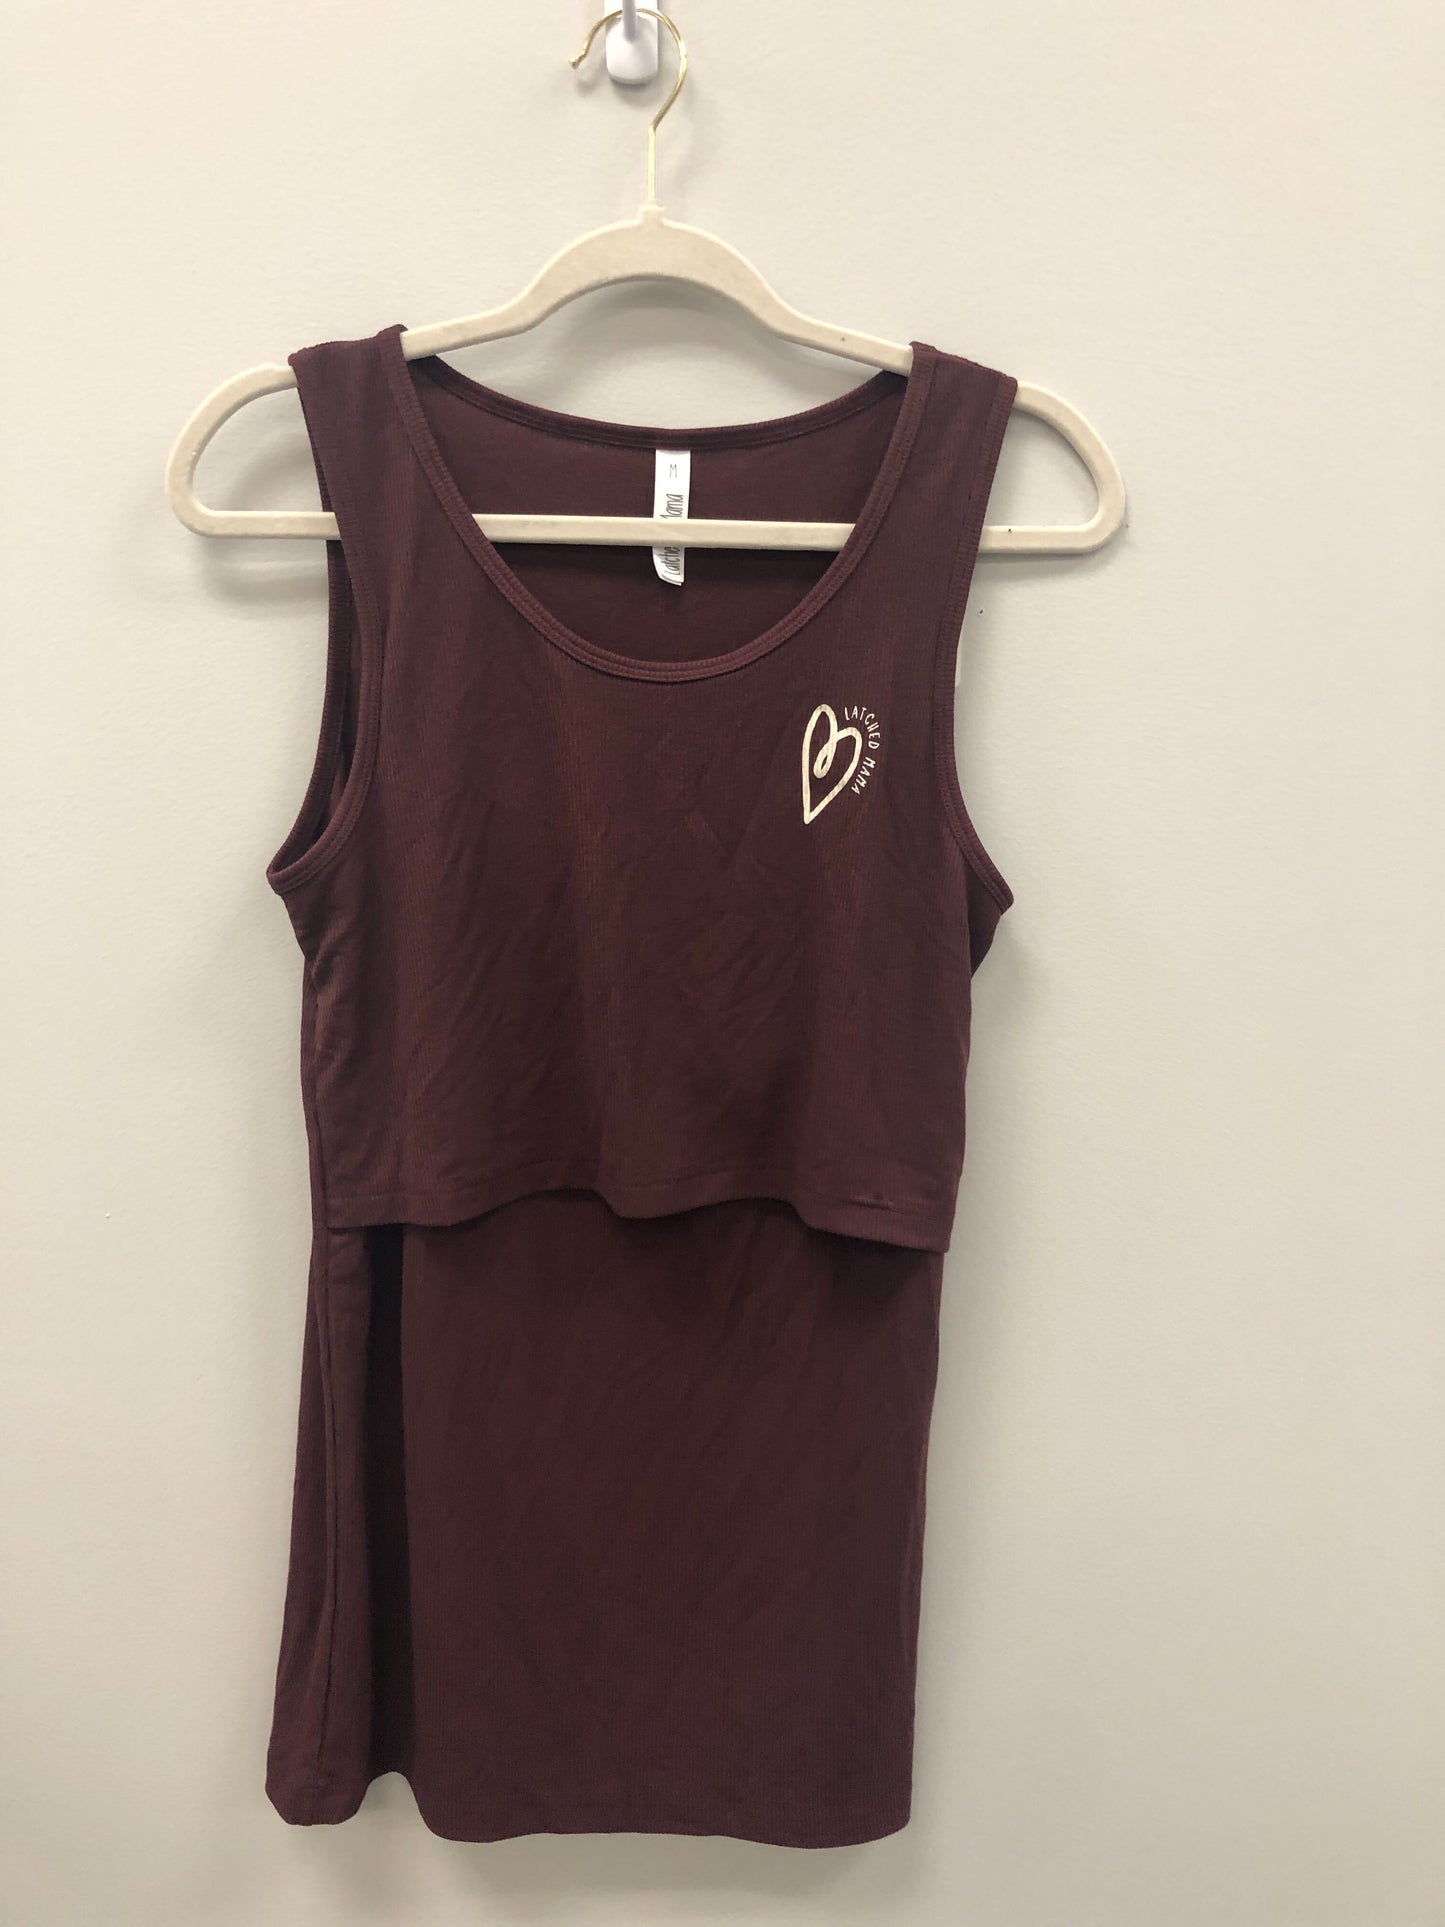 Outlet 5582 - Latched Mama Love Ribbed Nursing Tank - Wine - Medium